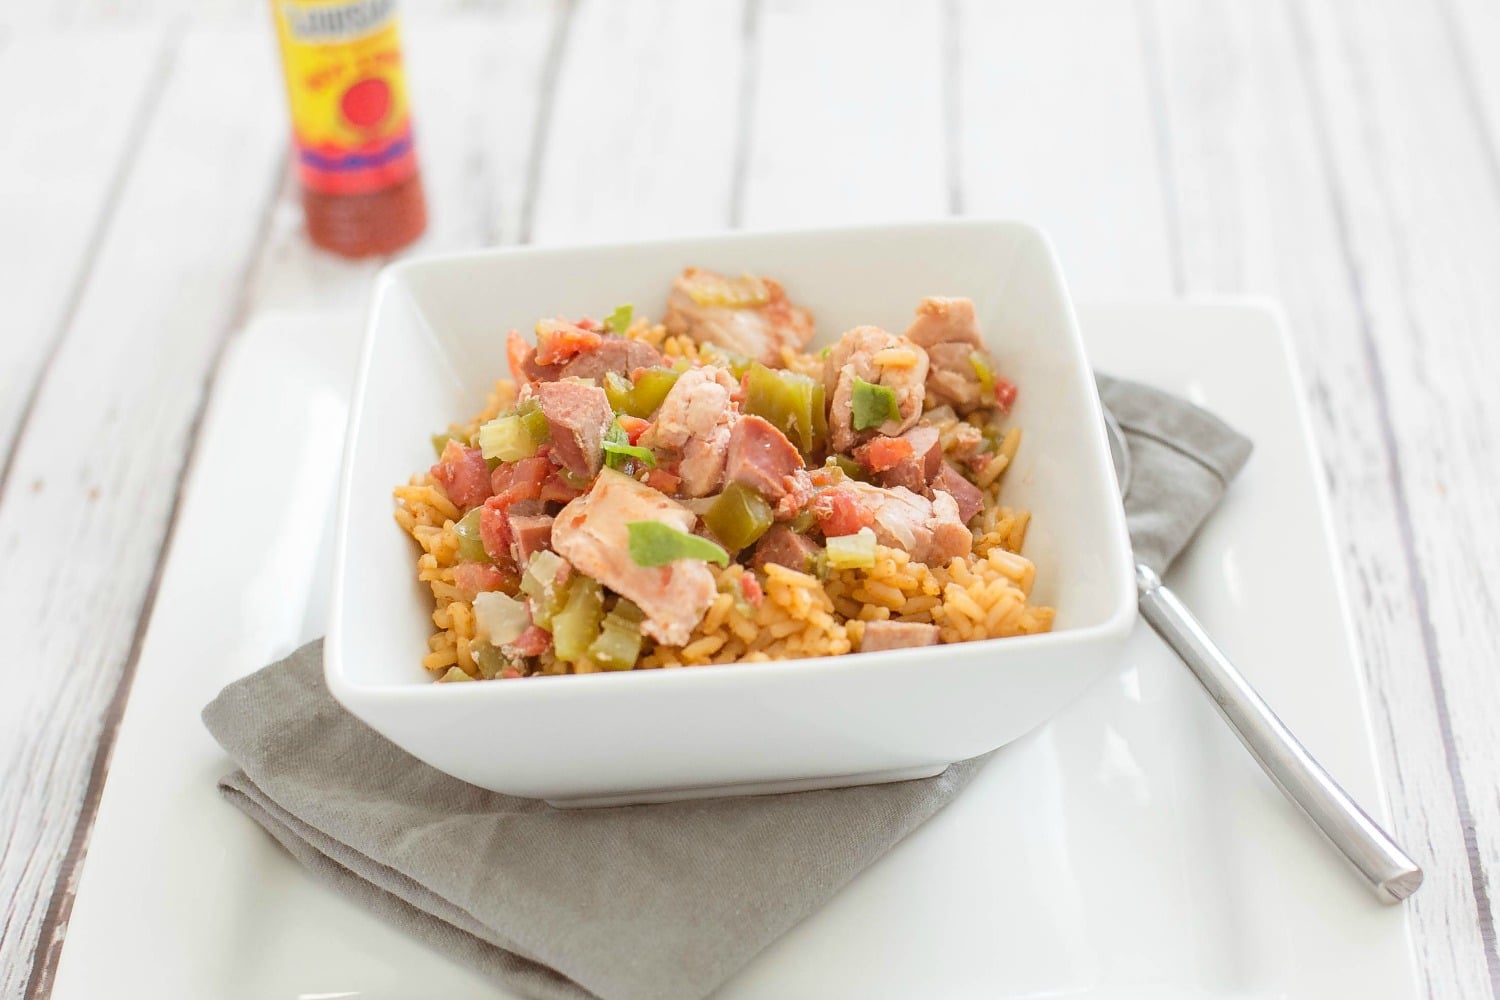 Serve this yummy and flavorful chicken jambalaya over rice!